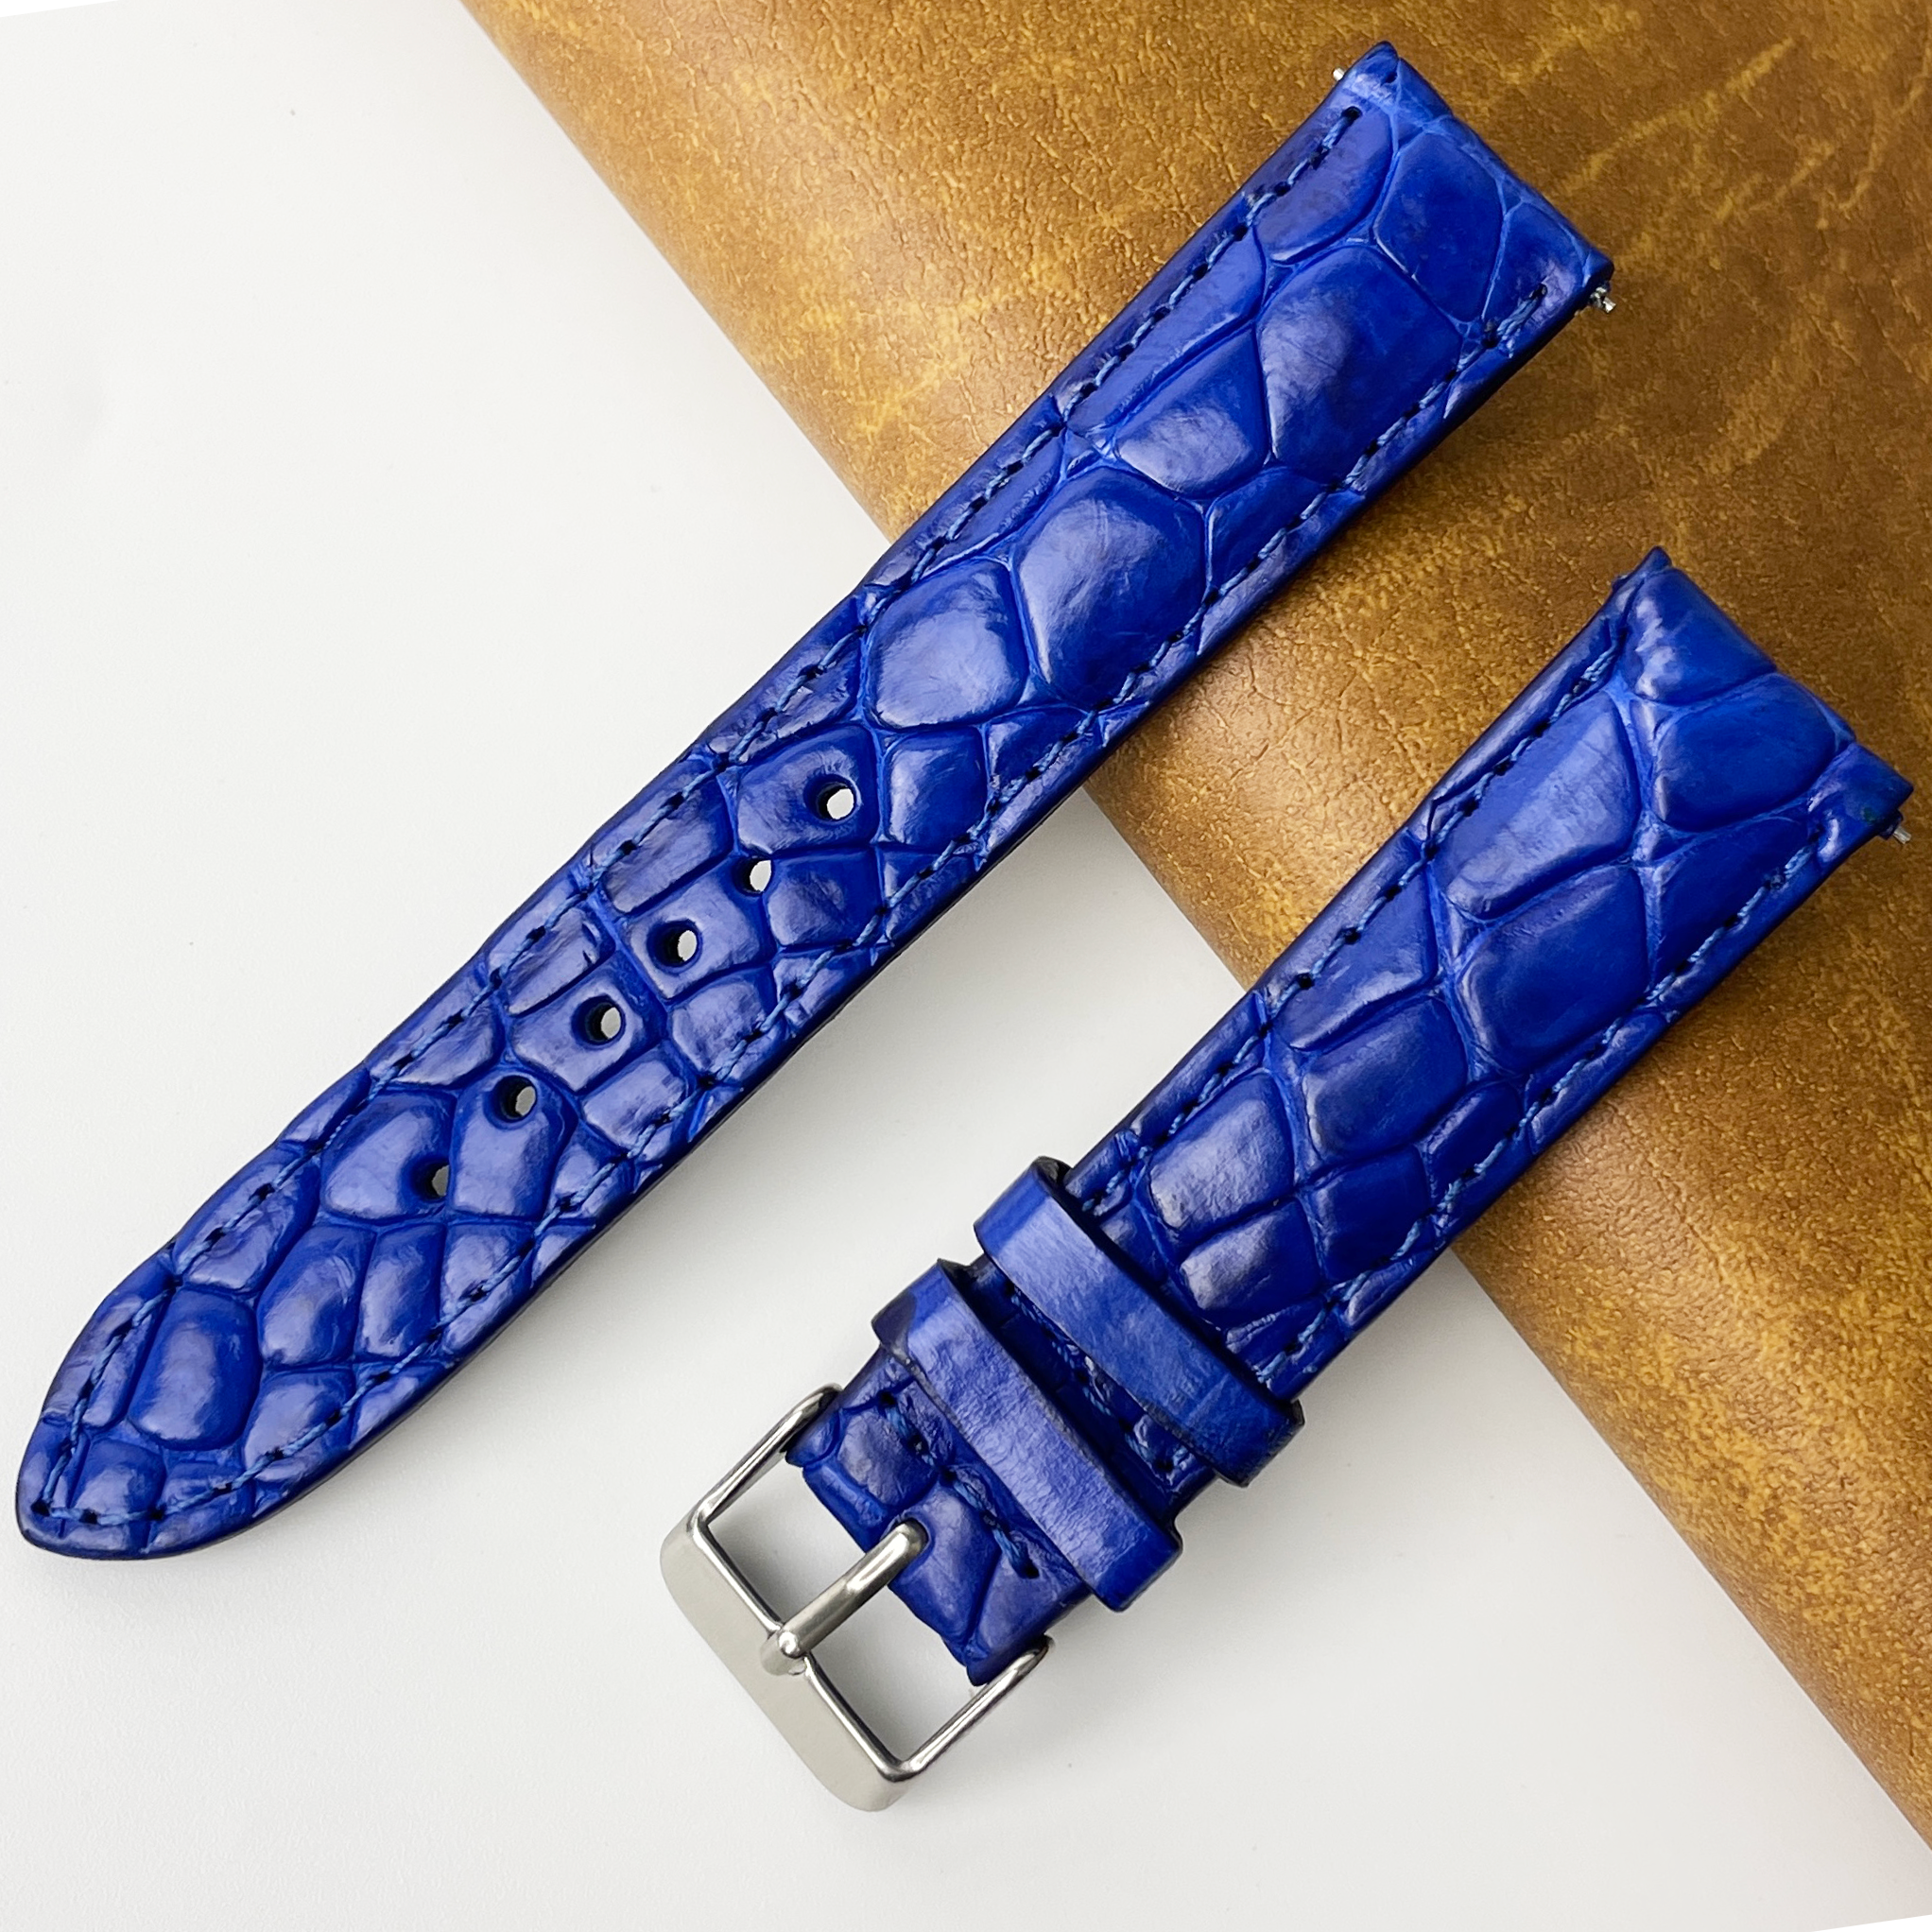 20mm Blue Unique Pattern Alligator Leather Watch Band For Men DH-50B